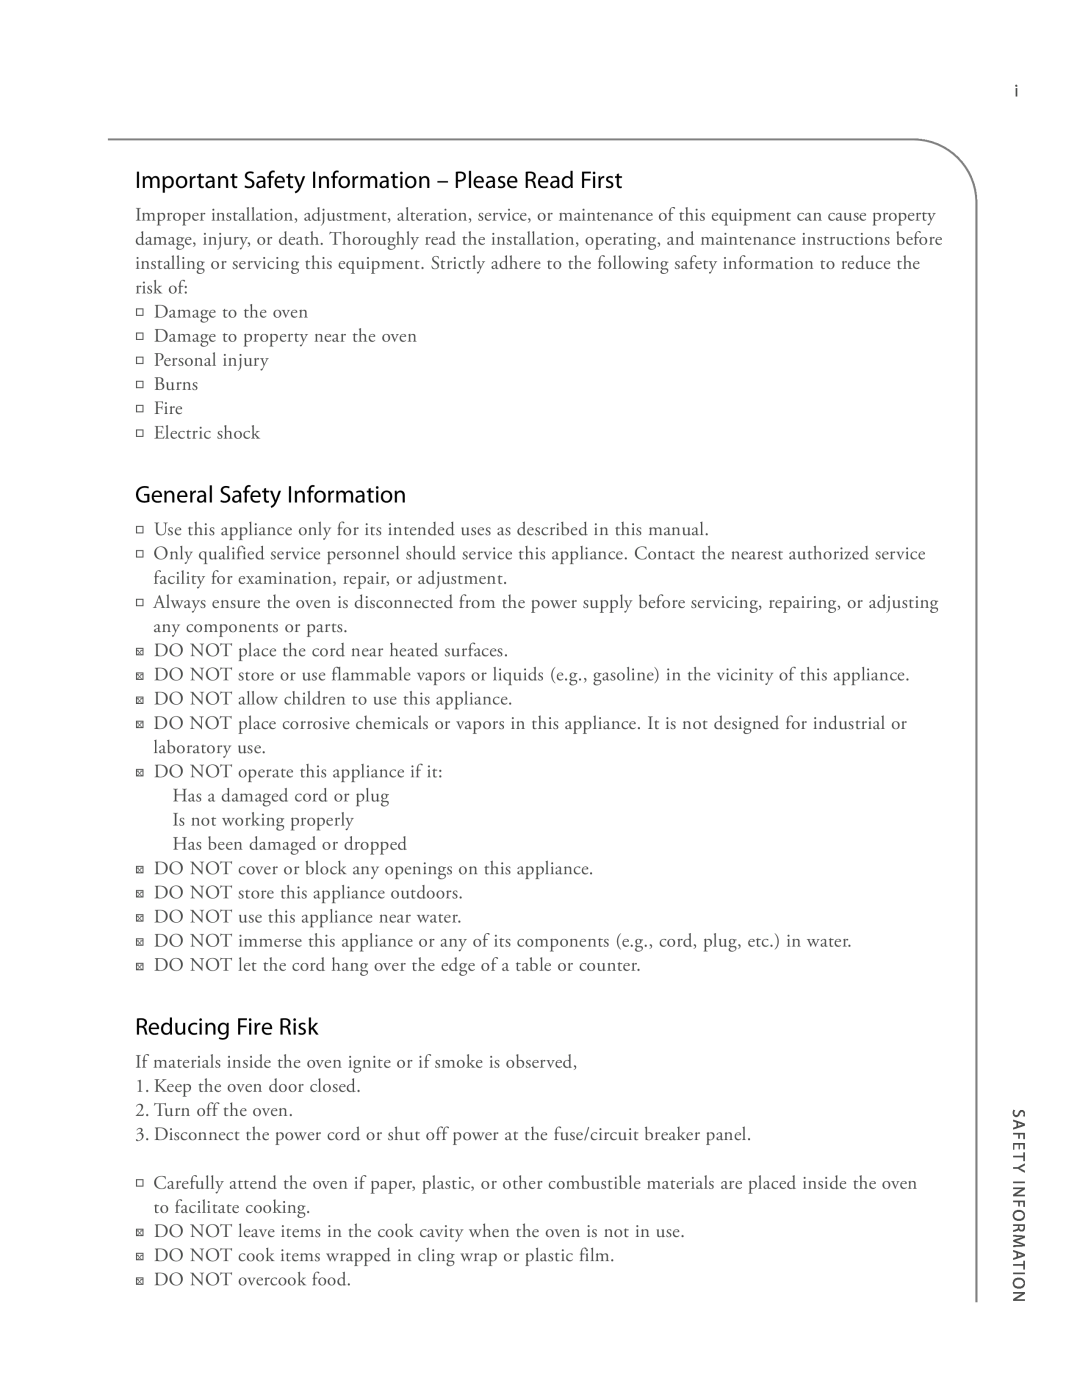 Turbo Chef Technologies 2020 HIGH h manual Important Safety Information - Please Read First, General Safety Information 